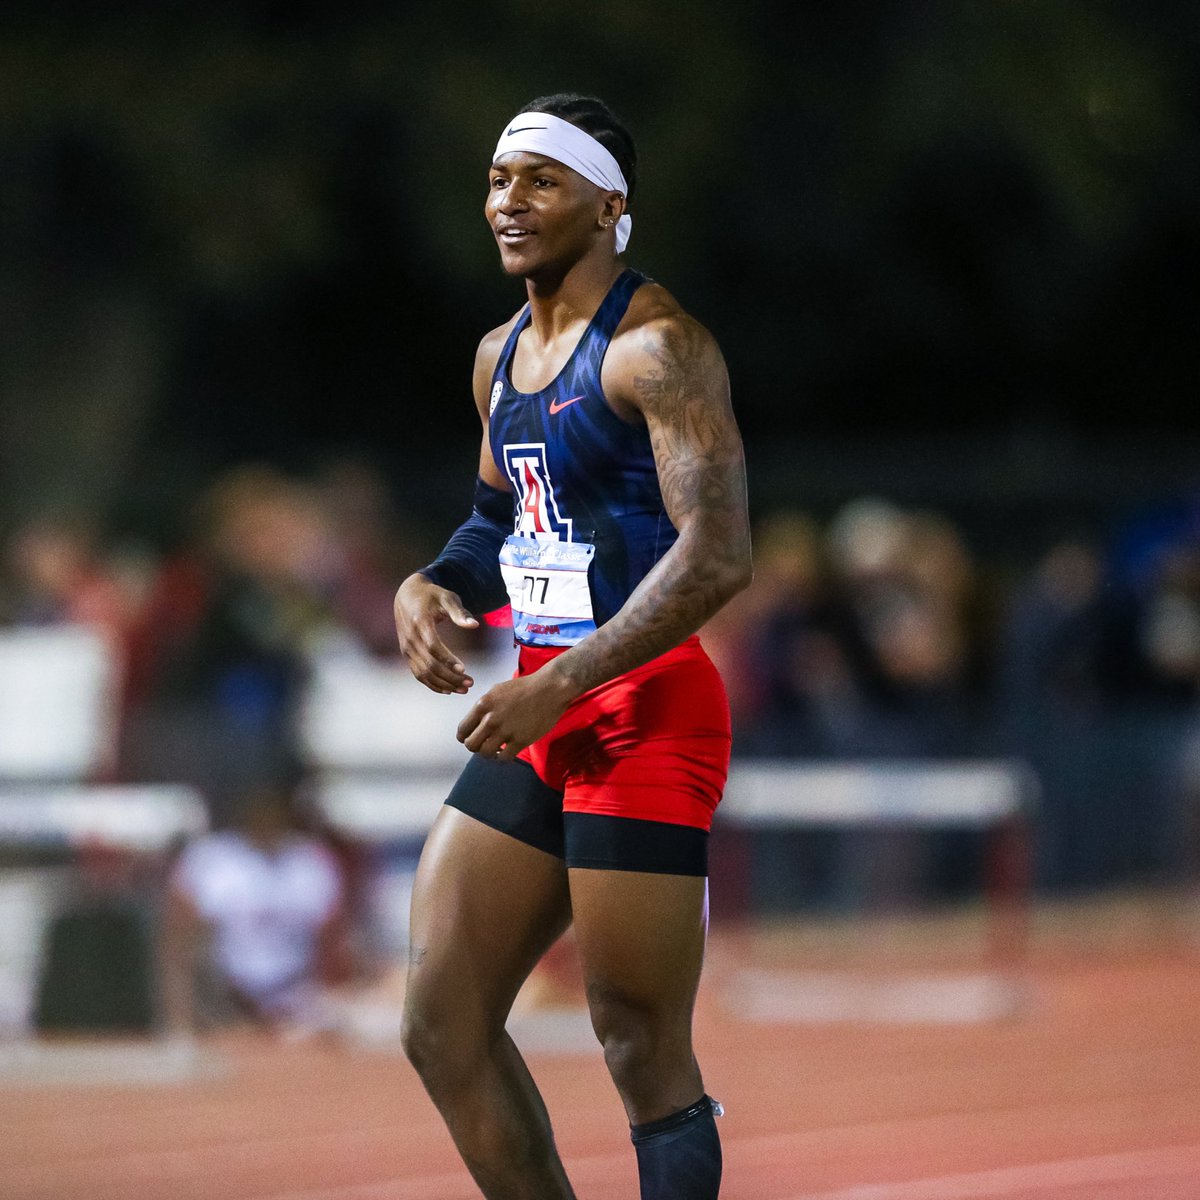 𝐓𝐎𝐏-𝐓𝐖𝐎 𝐅𝐈𝐍𝐈𝐒𝐇🥈 Sir Jonathan Sims finishes runner-up in the men’s triple jump with a leap of 49-6.25 (15.09m)! #BearDown | #BeLezoLike